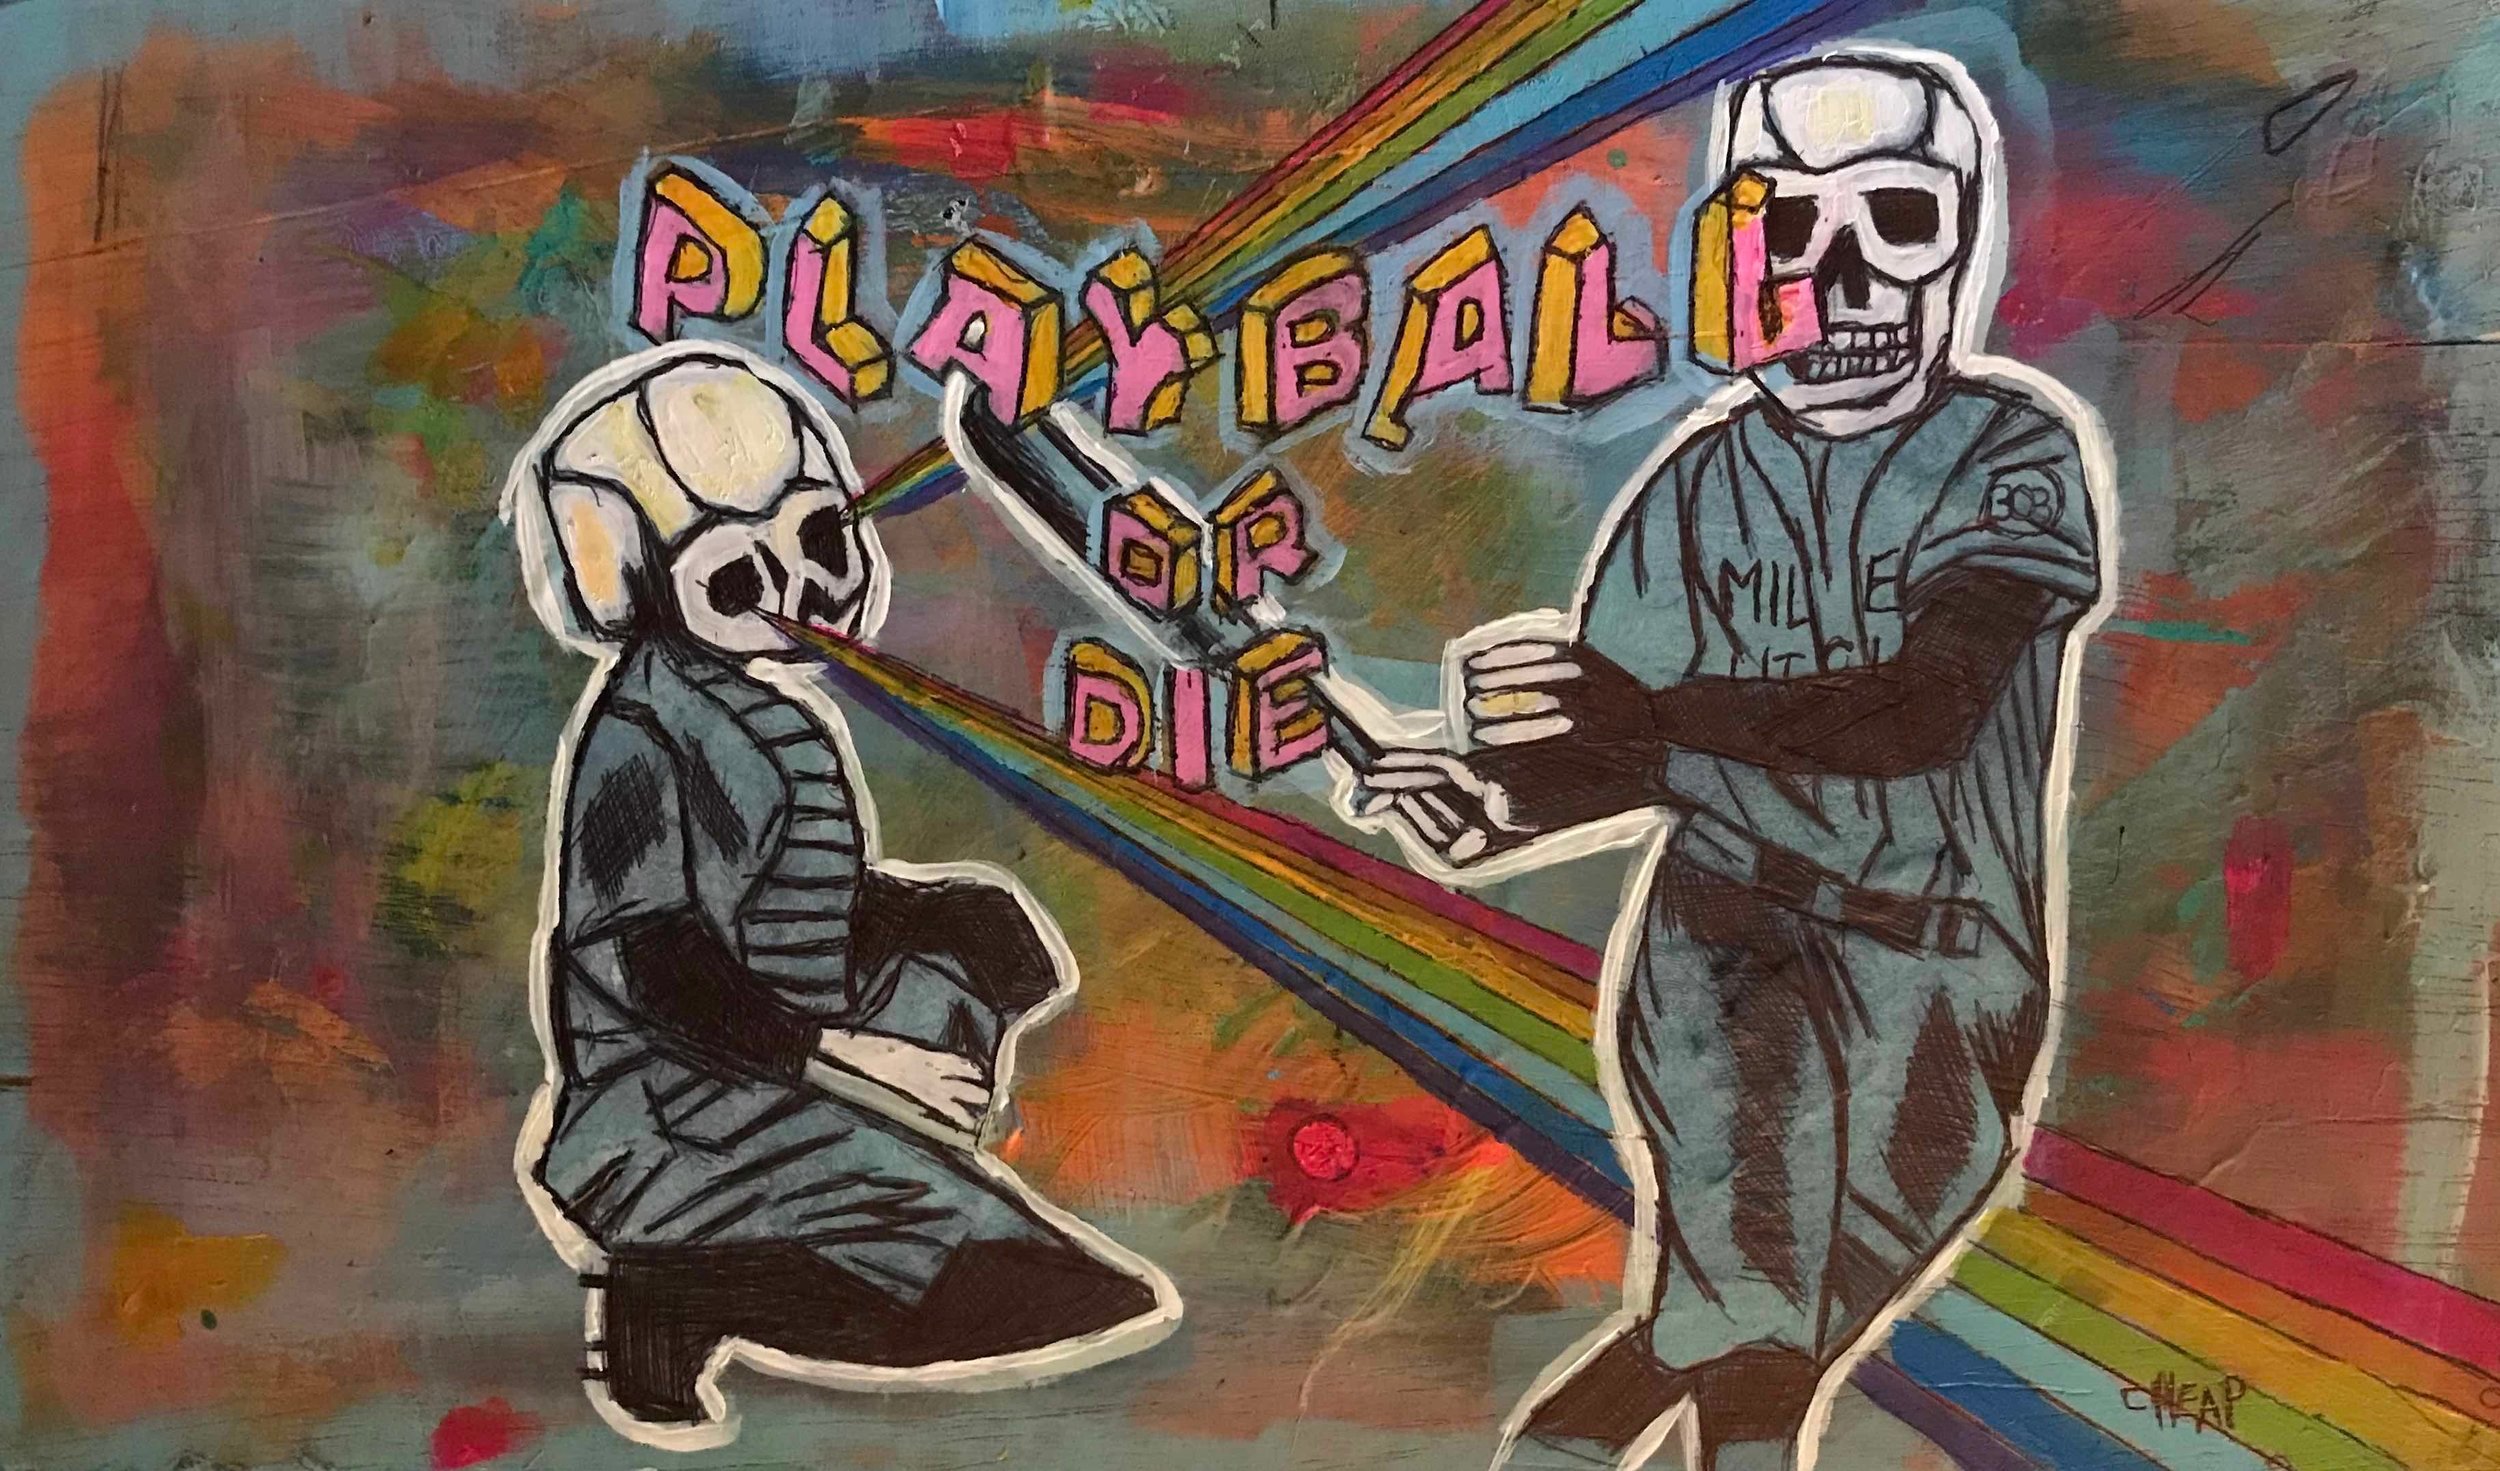 Play ball or die painting by Vincent Cheap.